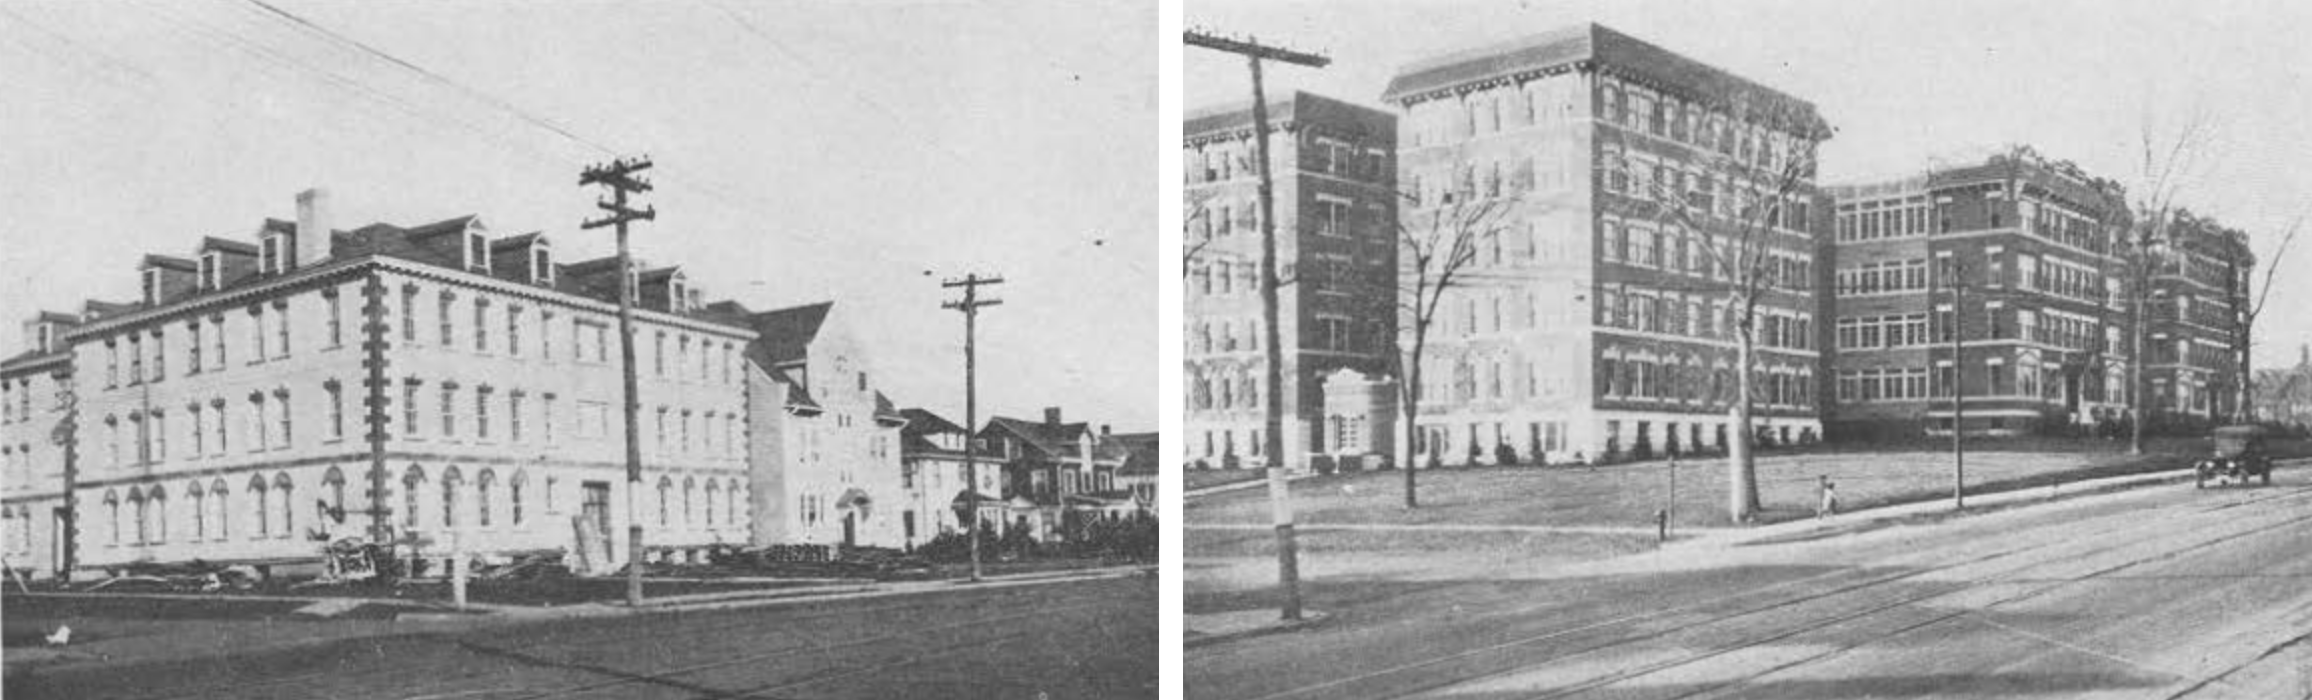 Robert Whitten’s 1924 West Hartford Zoning report warned that “large apartment houses are spreading farther west along Farmington Avenue” from the city into the suburb, where he believed single-family homes belonged. On the right side is The Packard, originally designed by Jewish builders to become upscale apartments.